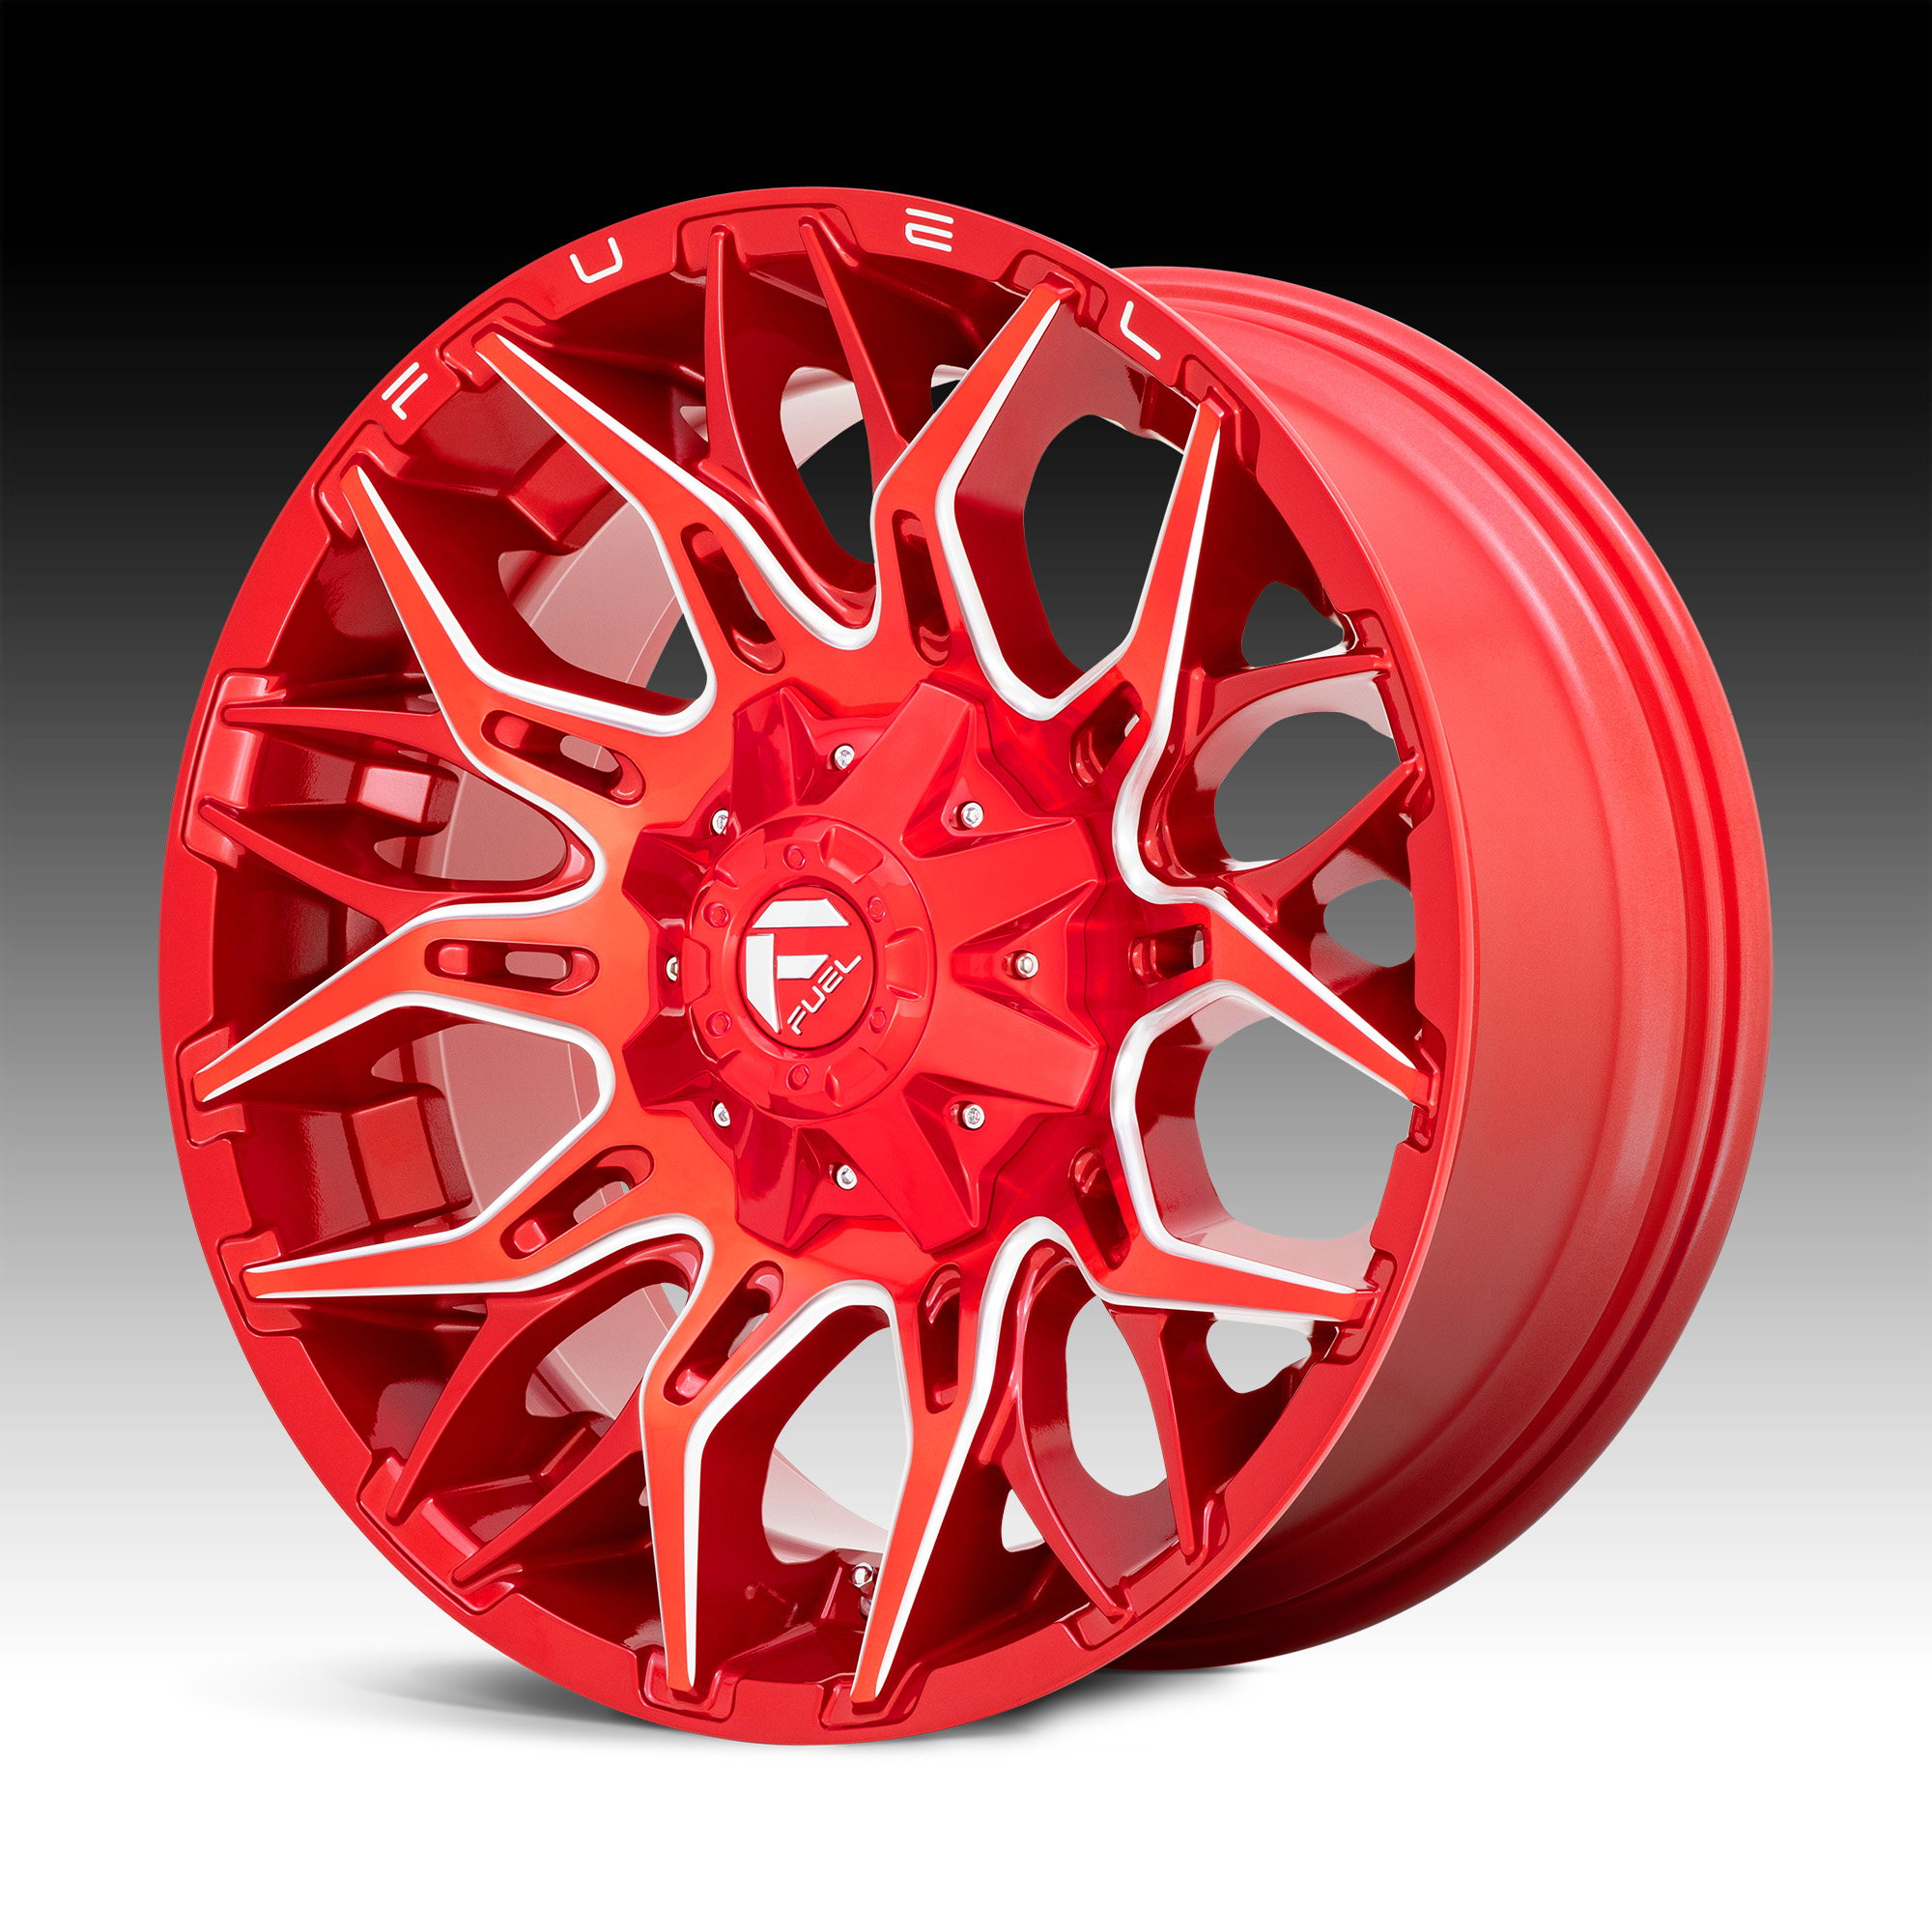 Fuel D771 Twitch Candy Red Milled 20x10 8x6 5 18mm D77120008247 194933112906 Ebay